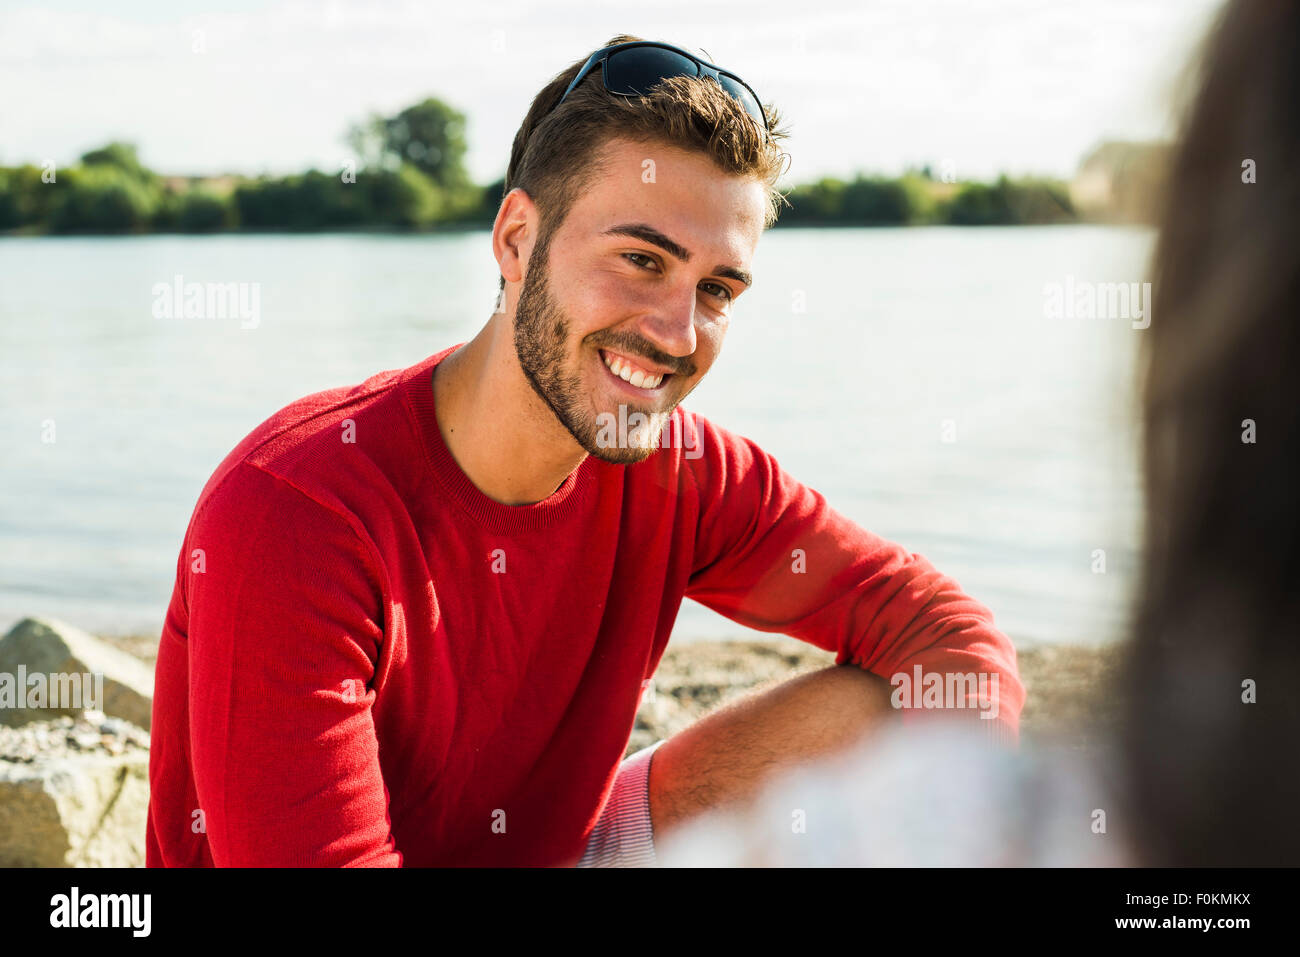 Young man smiling at woman by the riverside Stock Photo